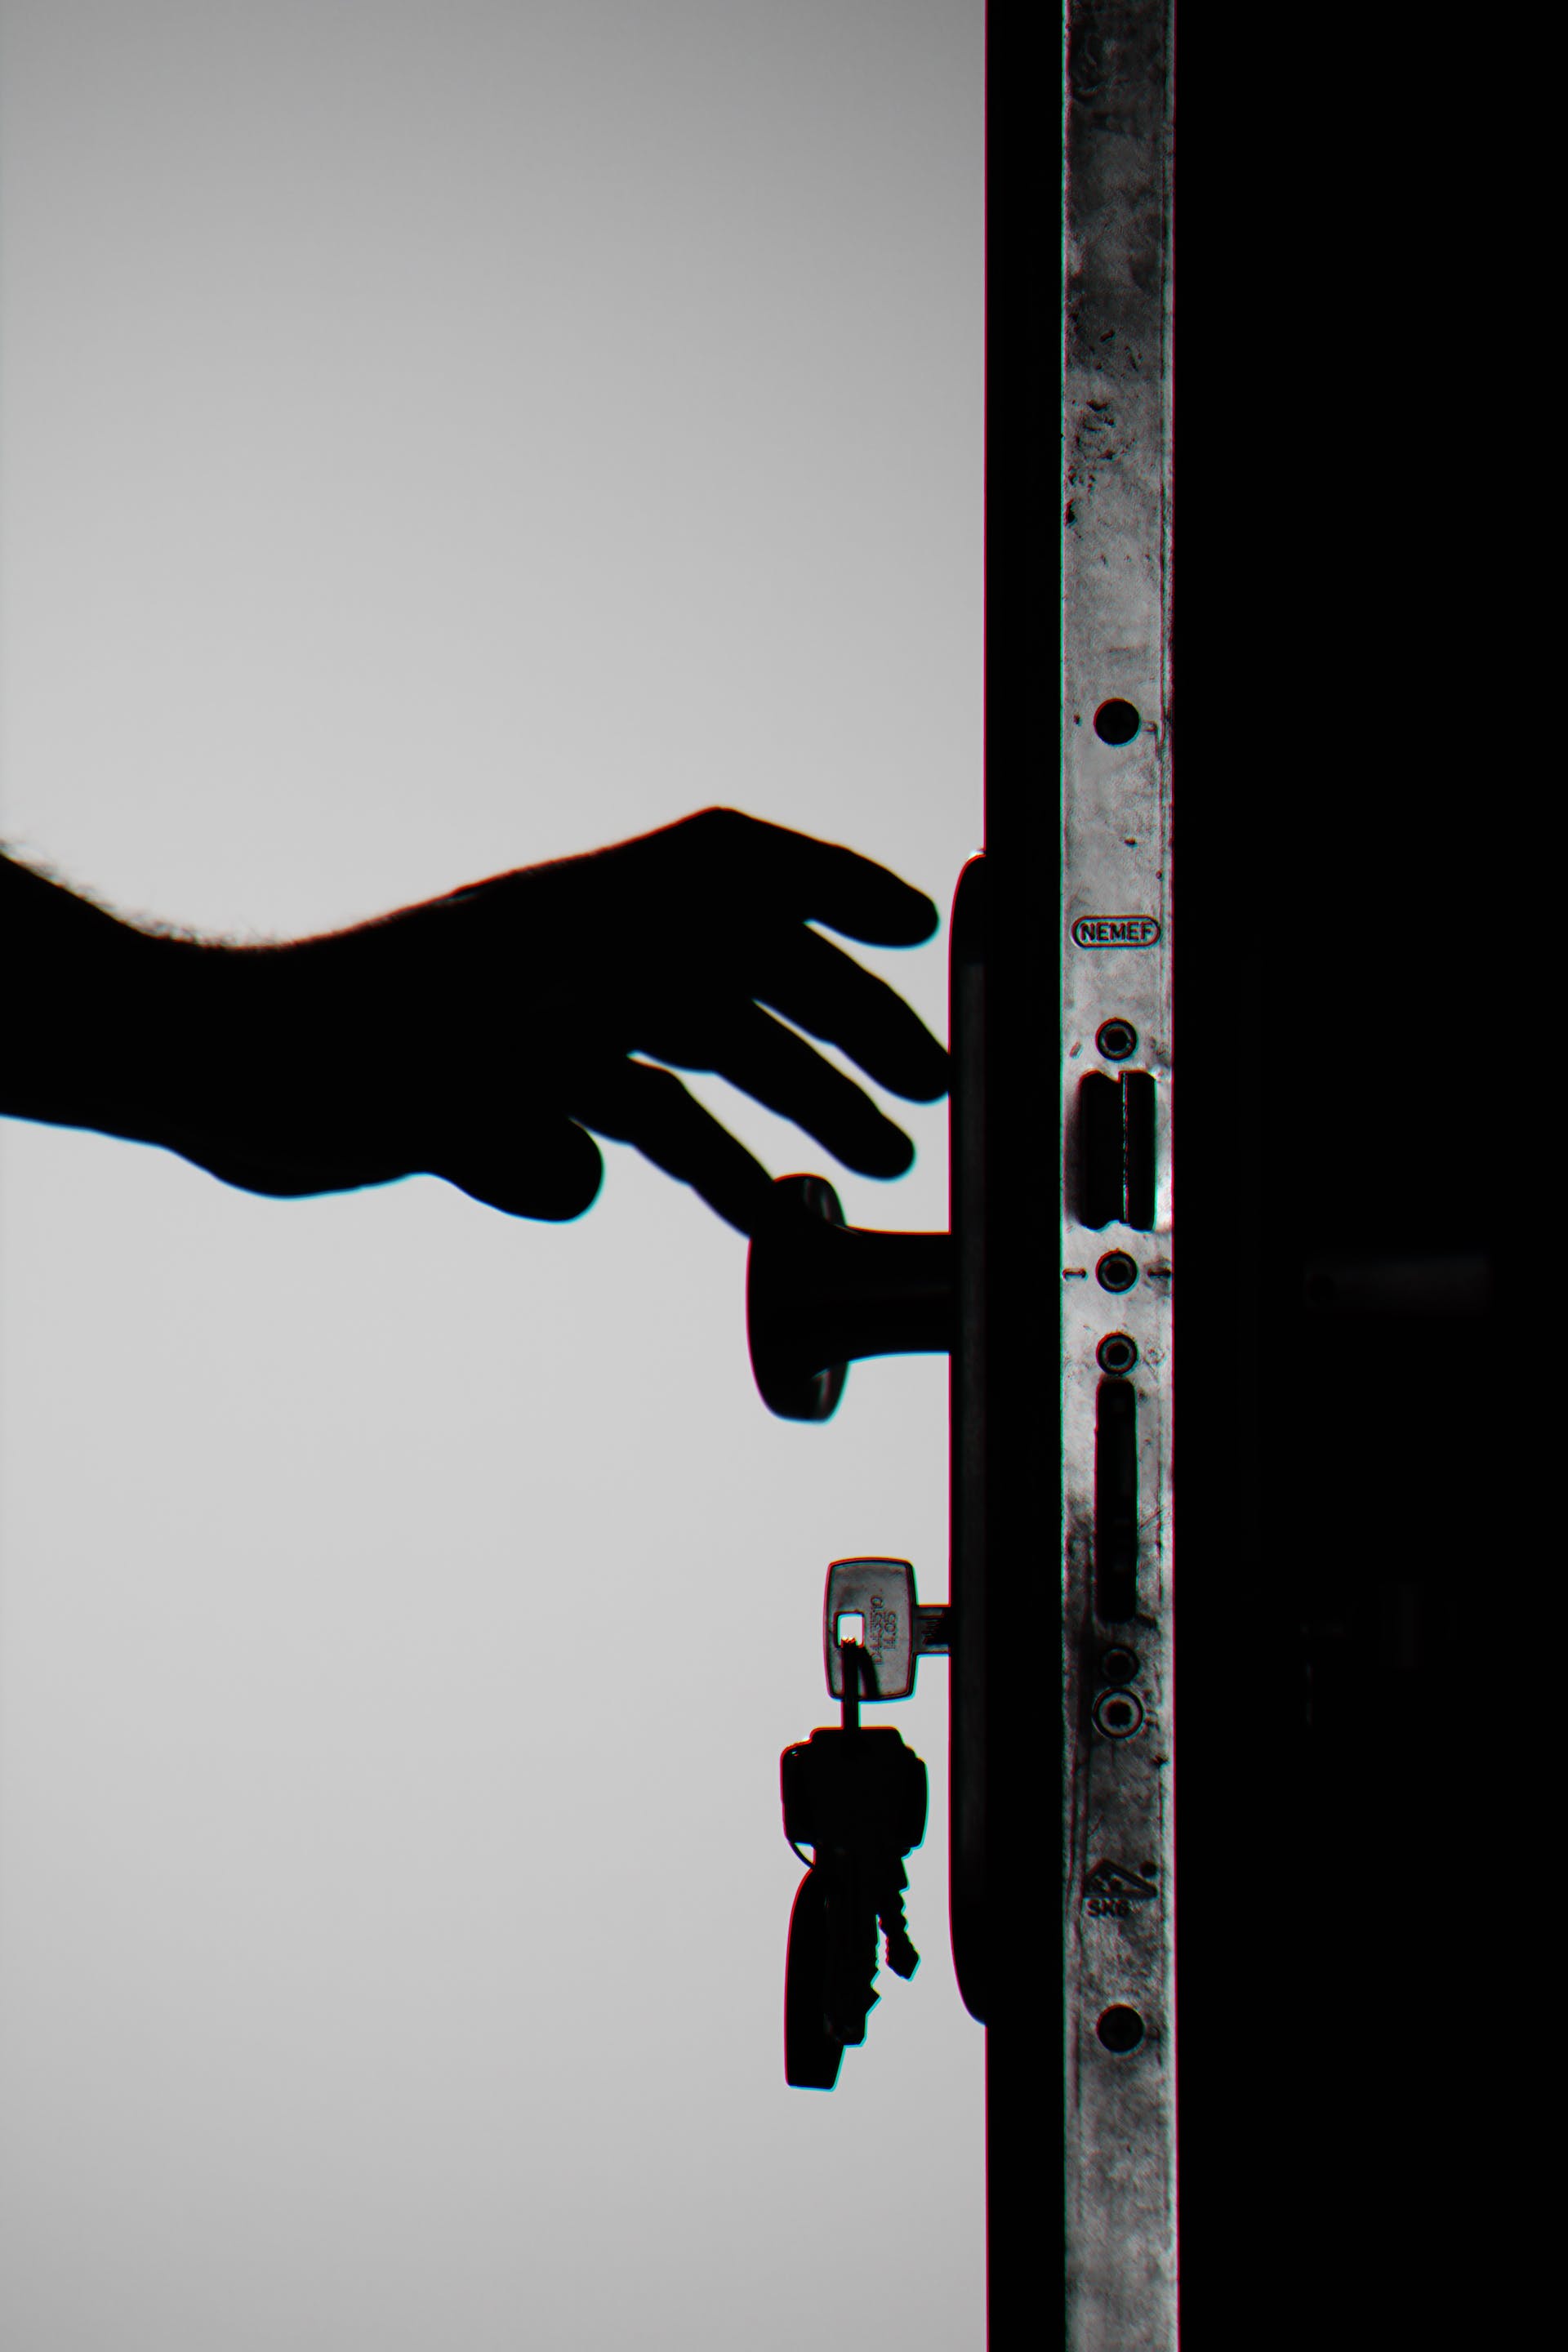 Silhouette of a person holding a door knob with the keys inside | Source: Pexels